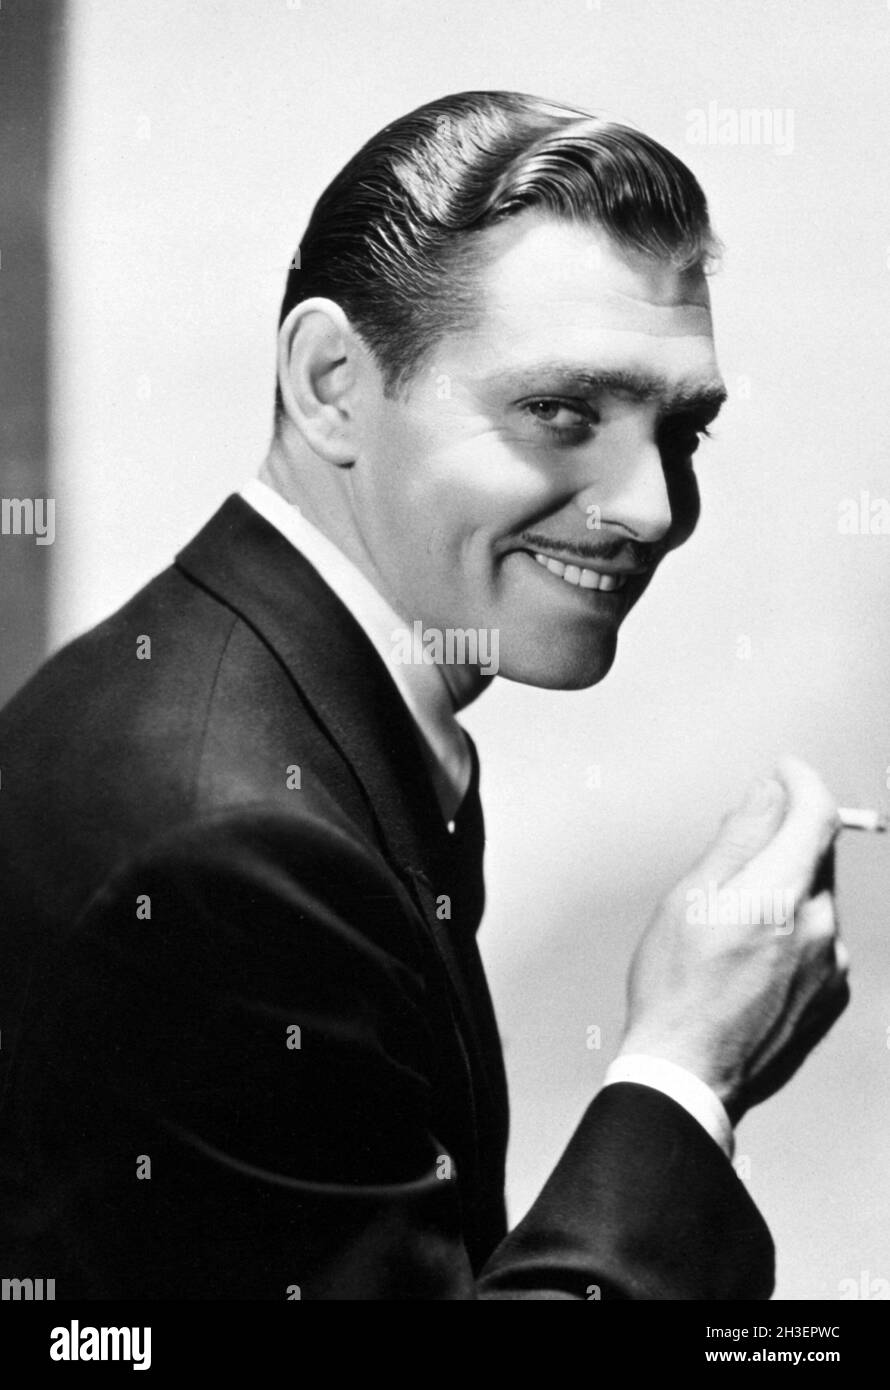 CLARK GABLE in CHAINED (1934), directed by CLARENCE BROWN. Credit: M.G.M. / Album Stock Photo